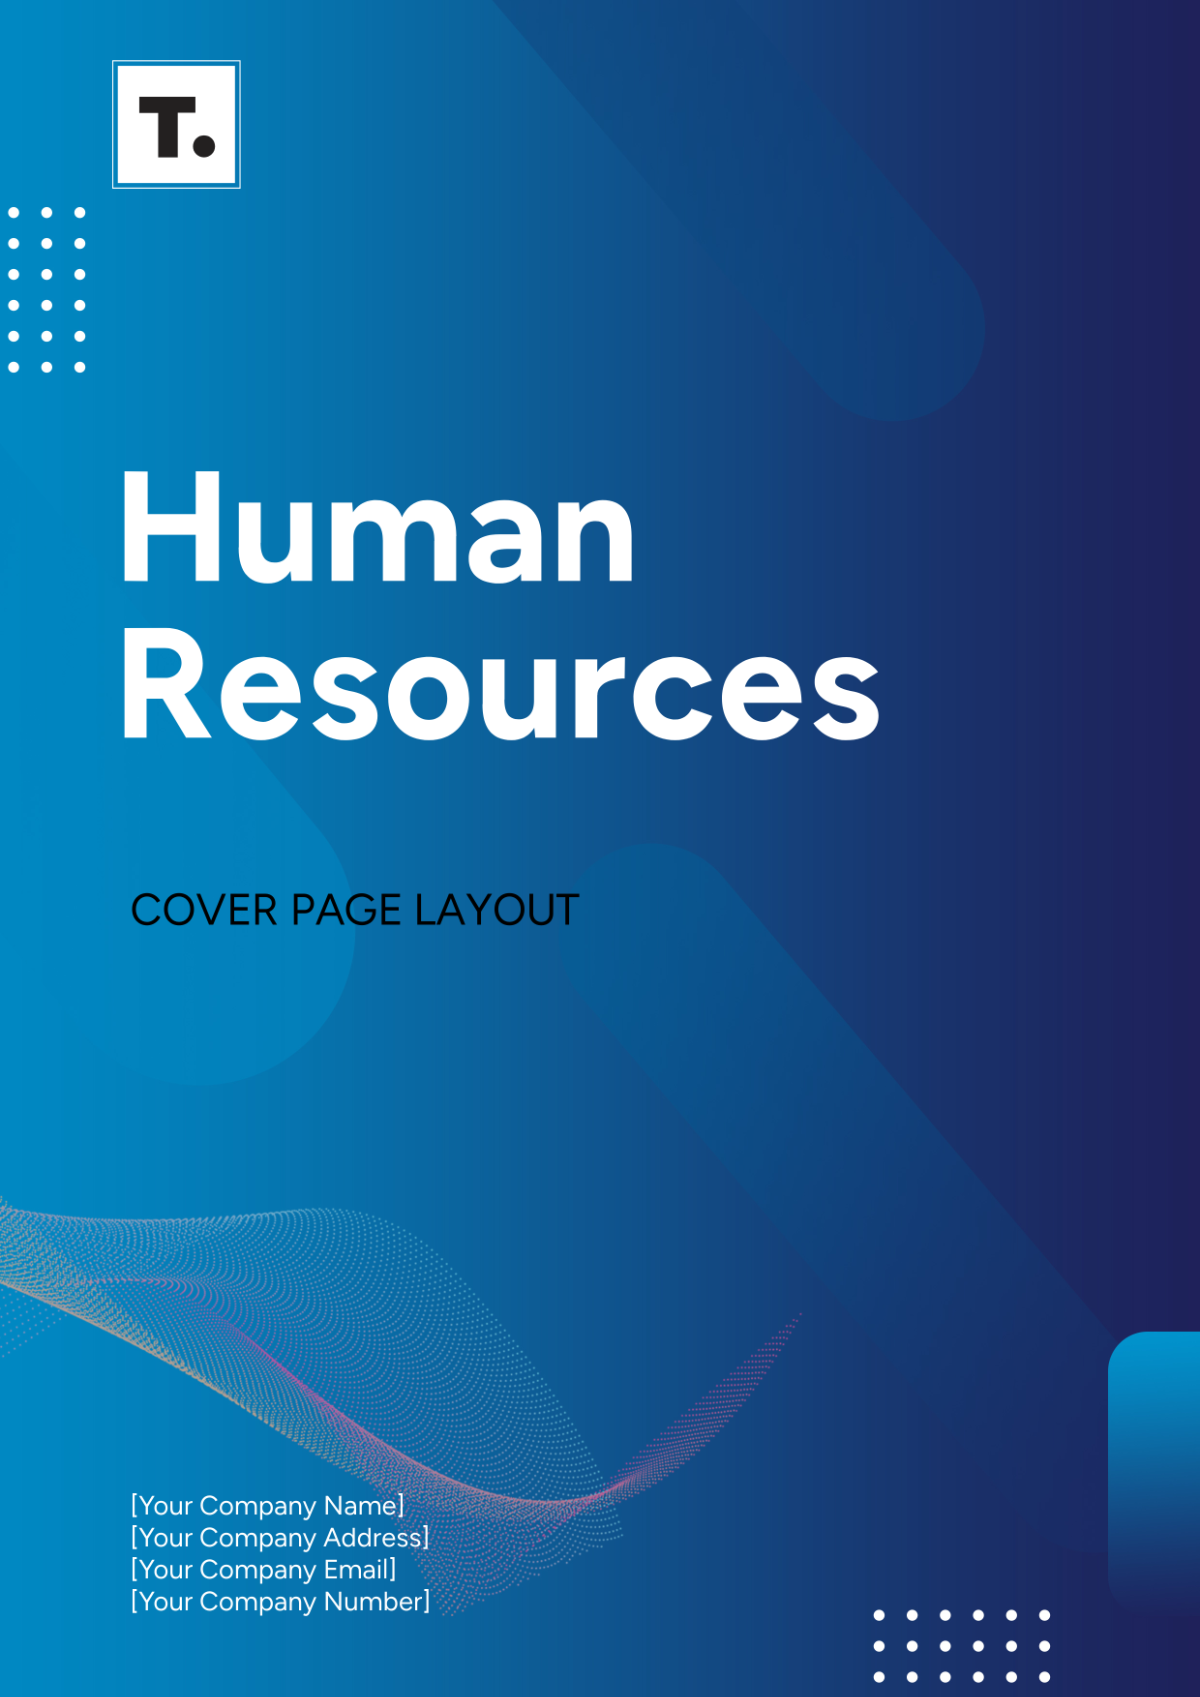 Human Resources Cover Page Layout